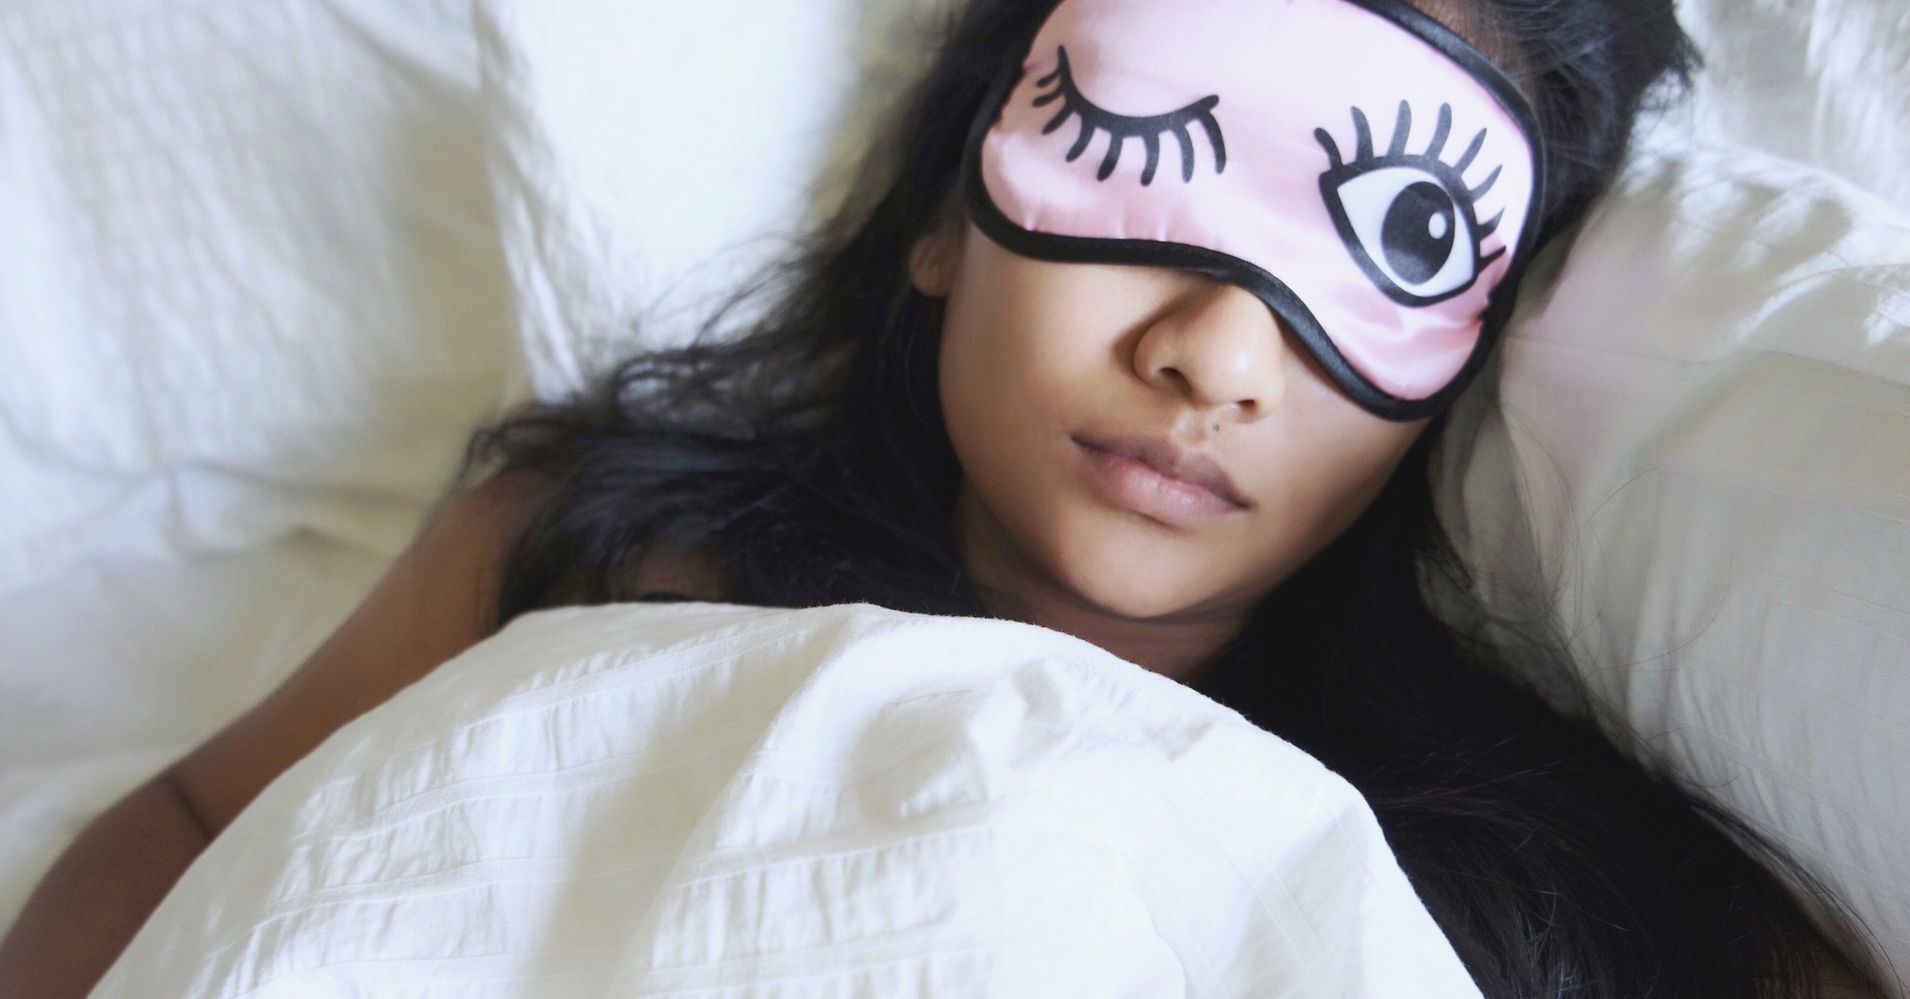 Why Do Some People Need More Sleep Than Others?